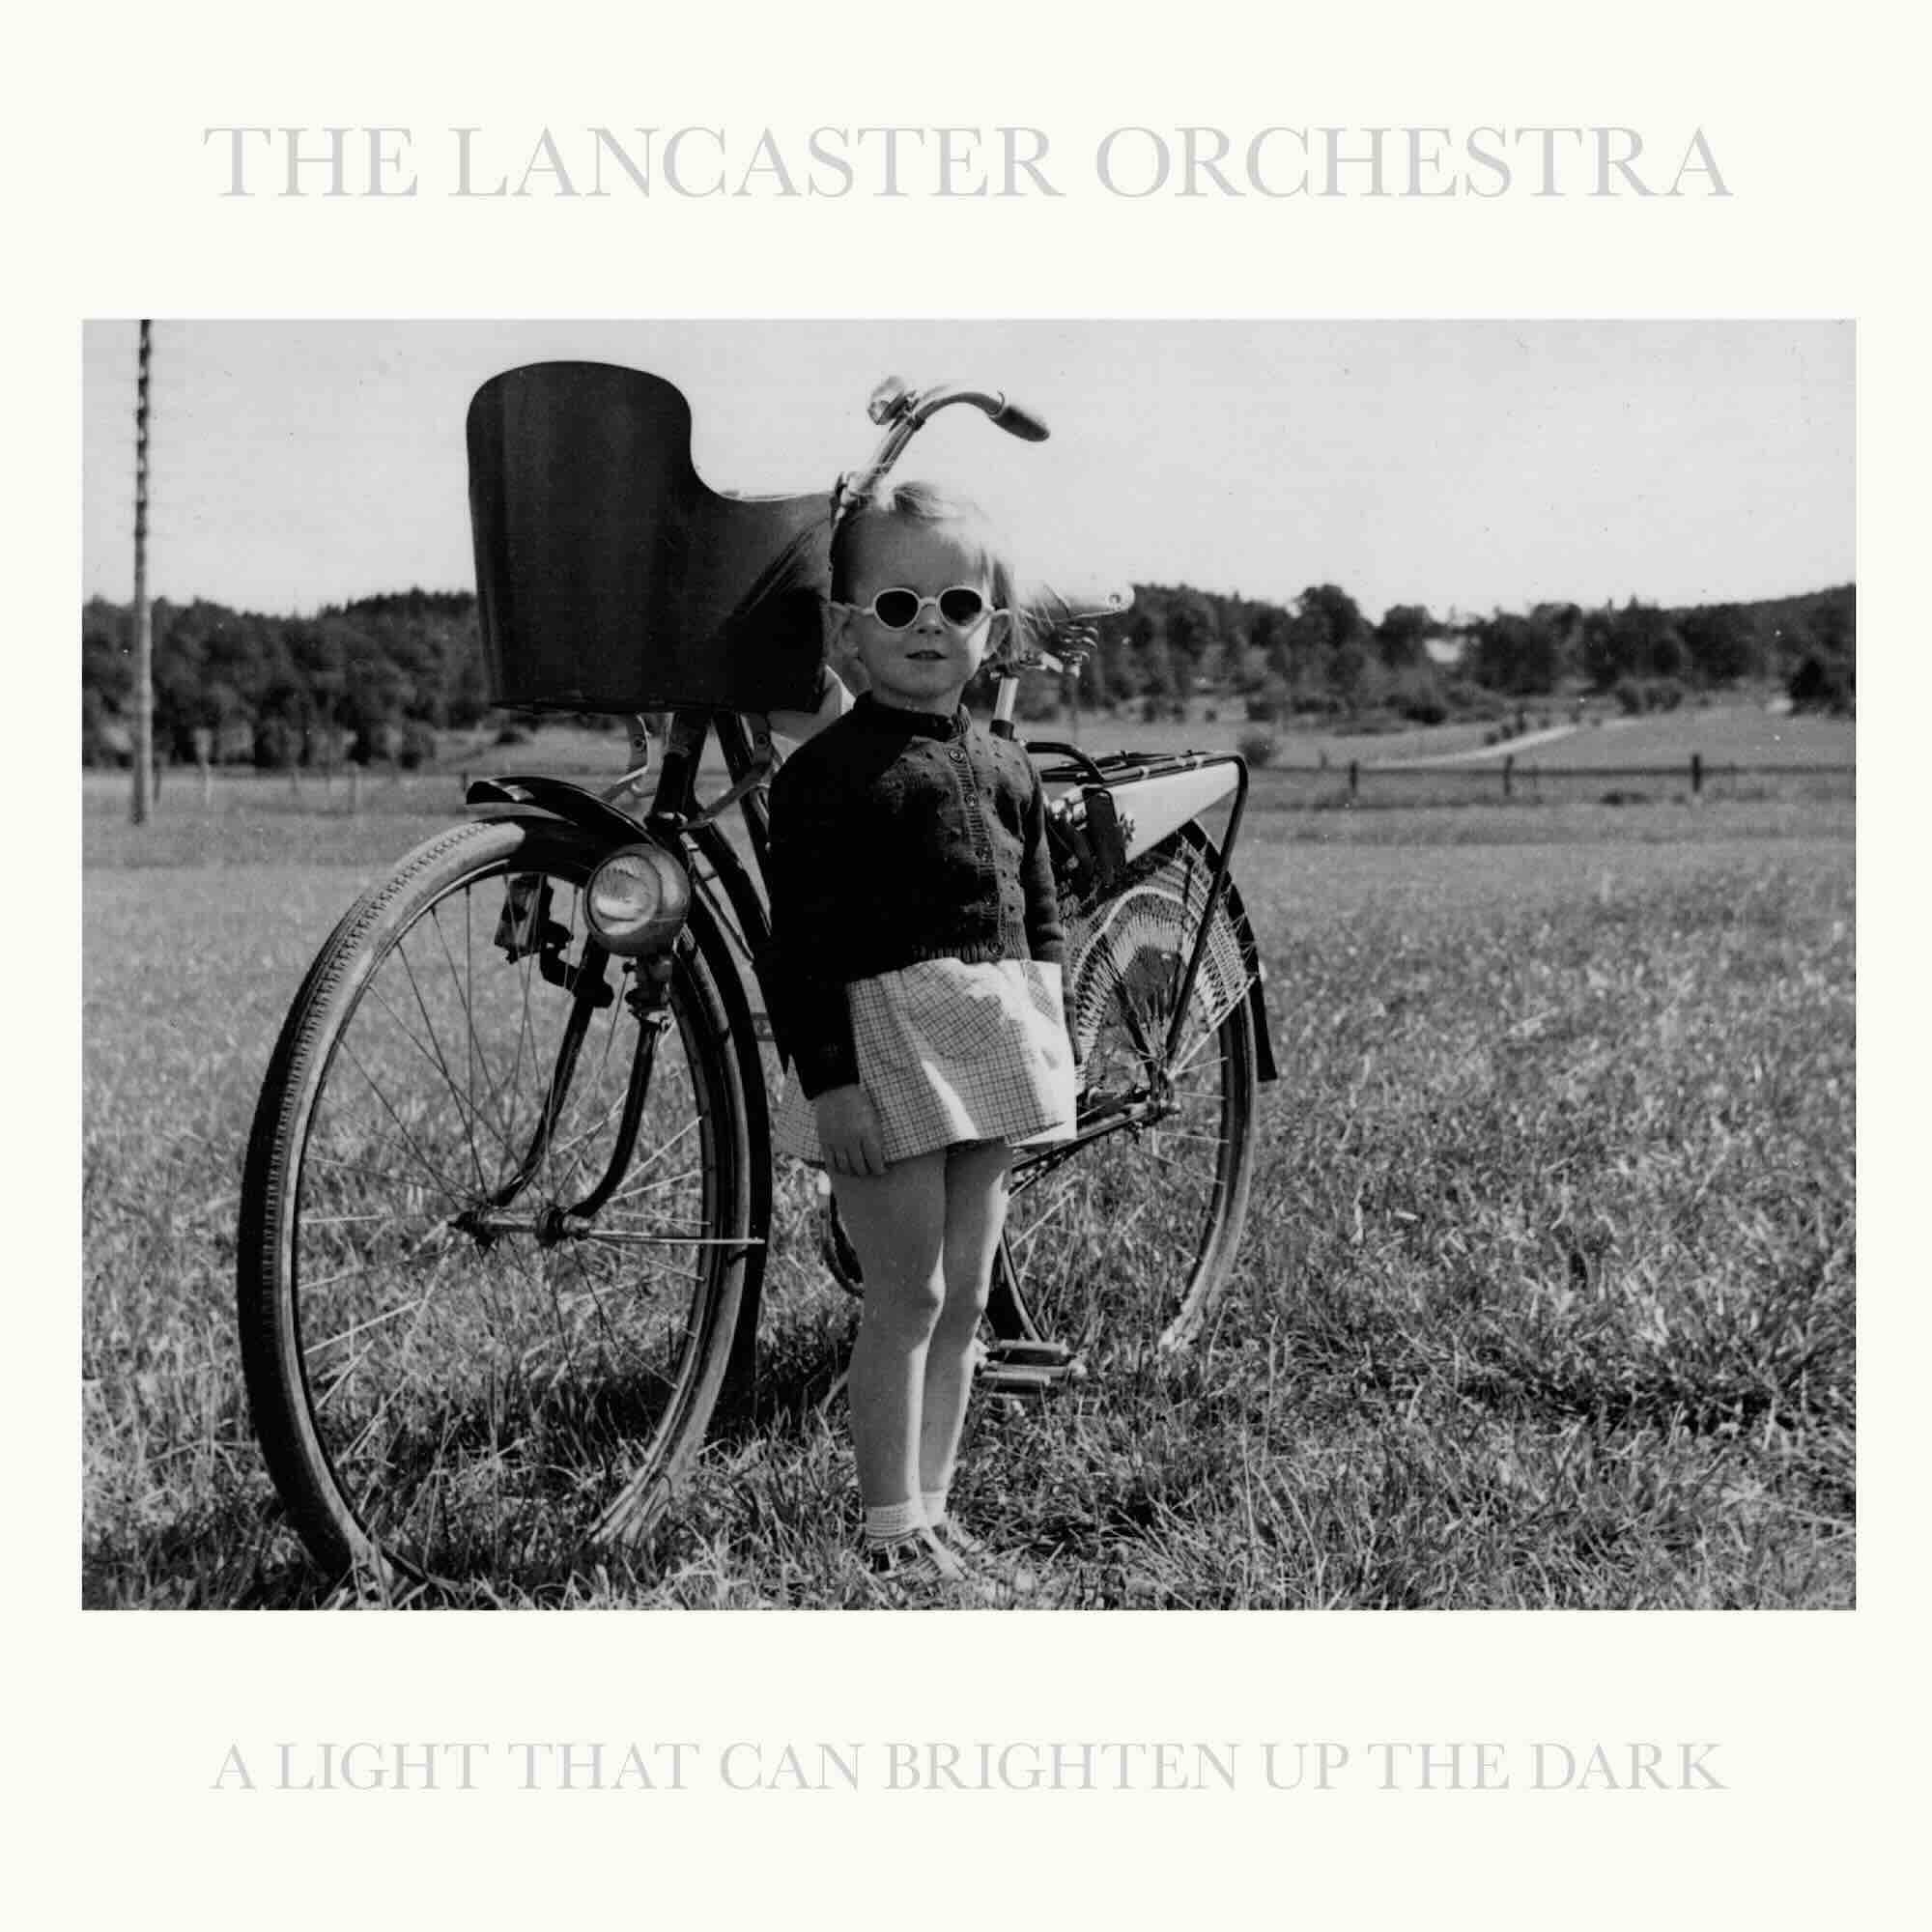 Cover art for the album - black and white photo of a girl about 4 years old with sunglasses standing in front of a bicycle.